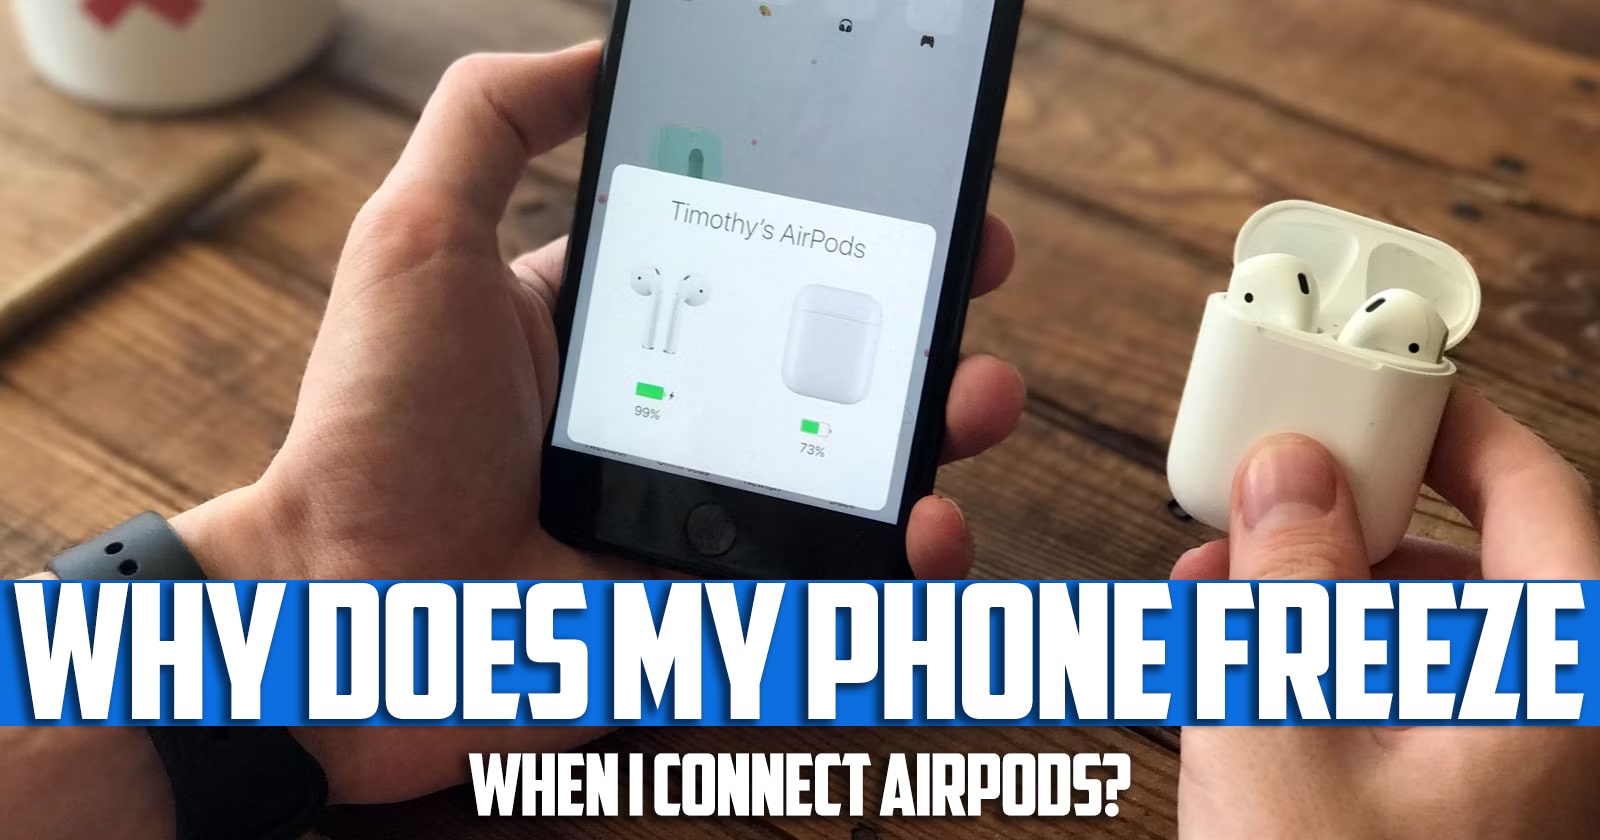 Why does my phone freeze when I connect AirPods